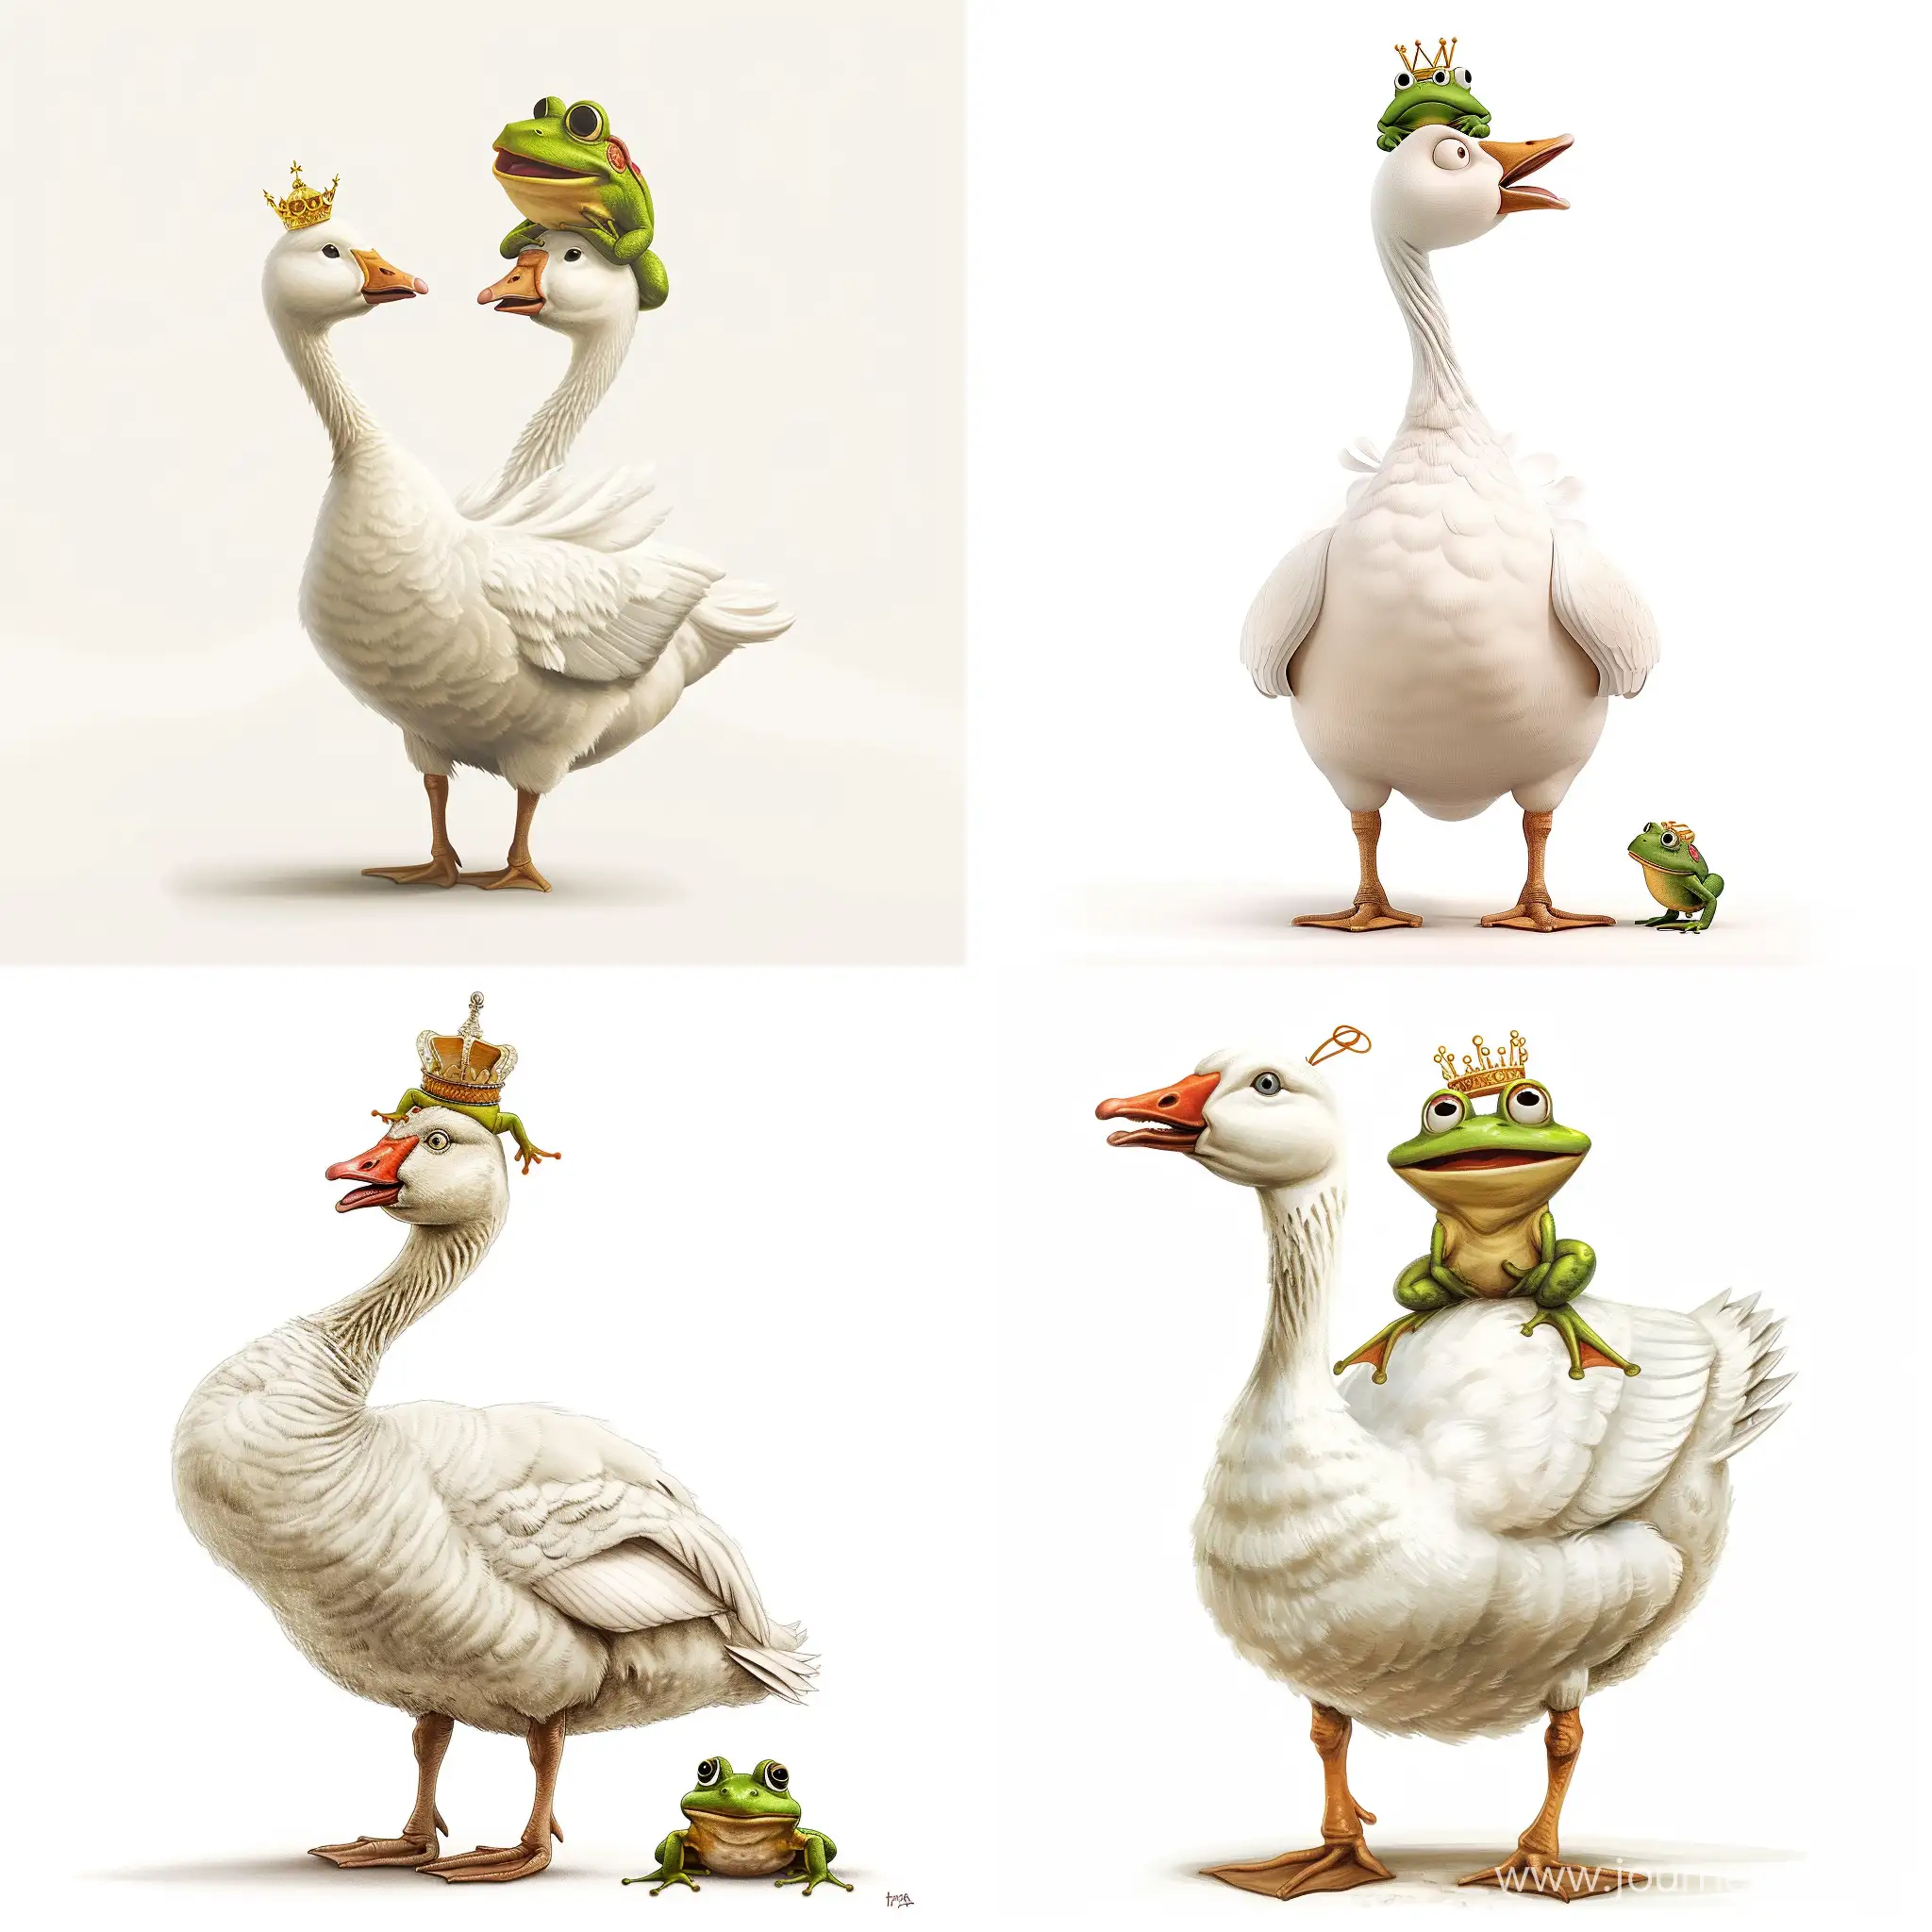 A white goose standing and talking to a frog, on his head, who has a small golden crown, on a white background, in the style of a caricature